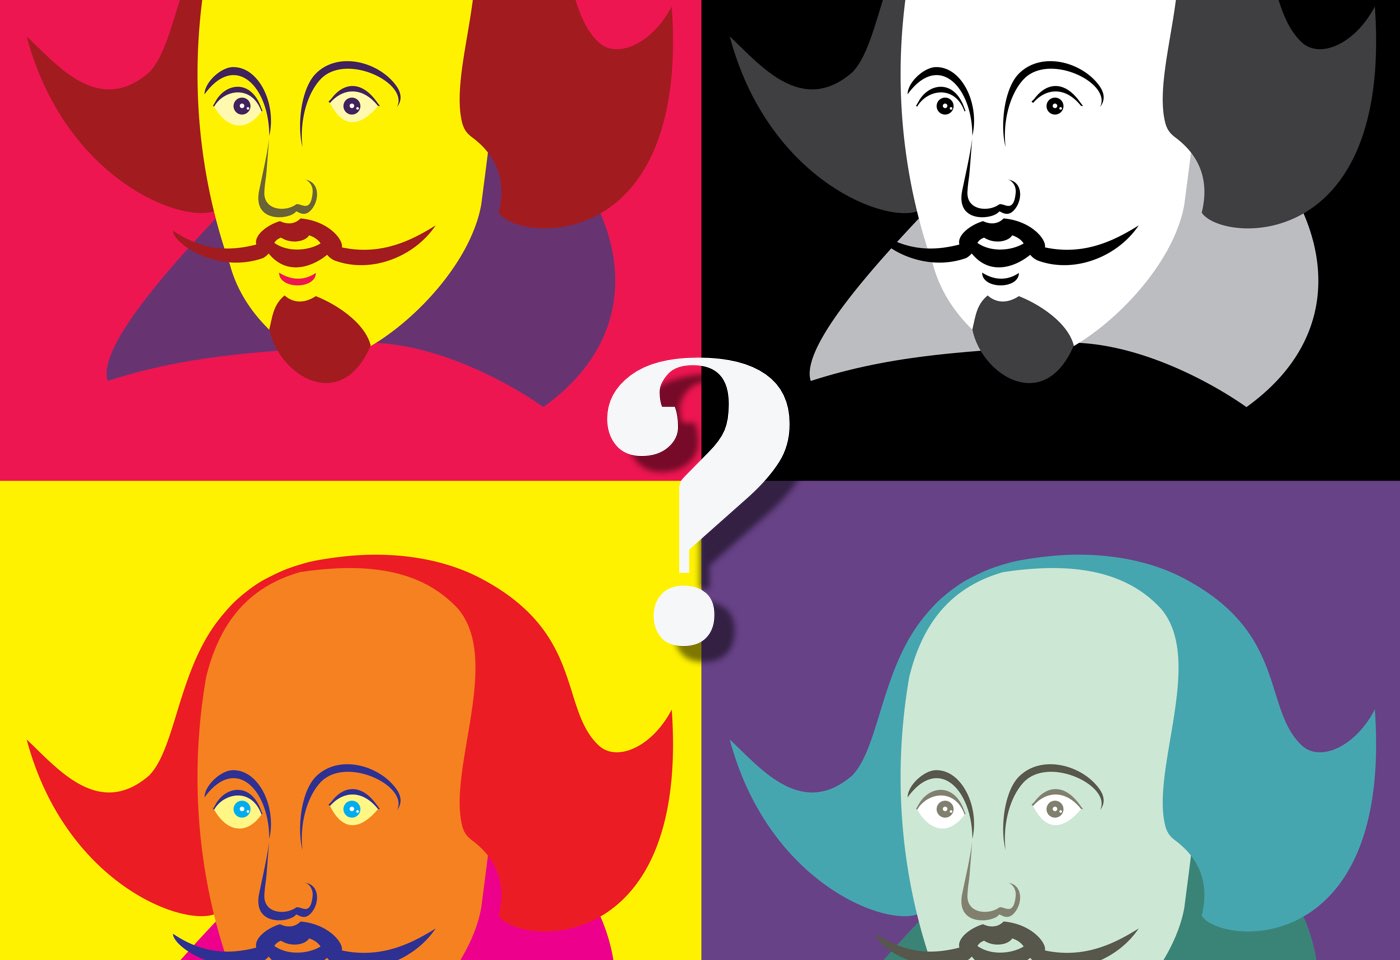 Shakespeare opinion  &  contemporary lending system